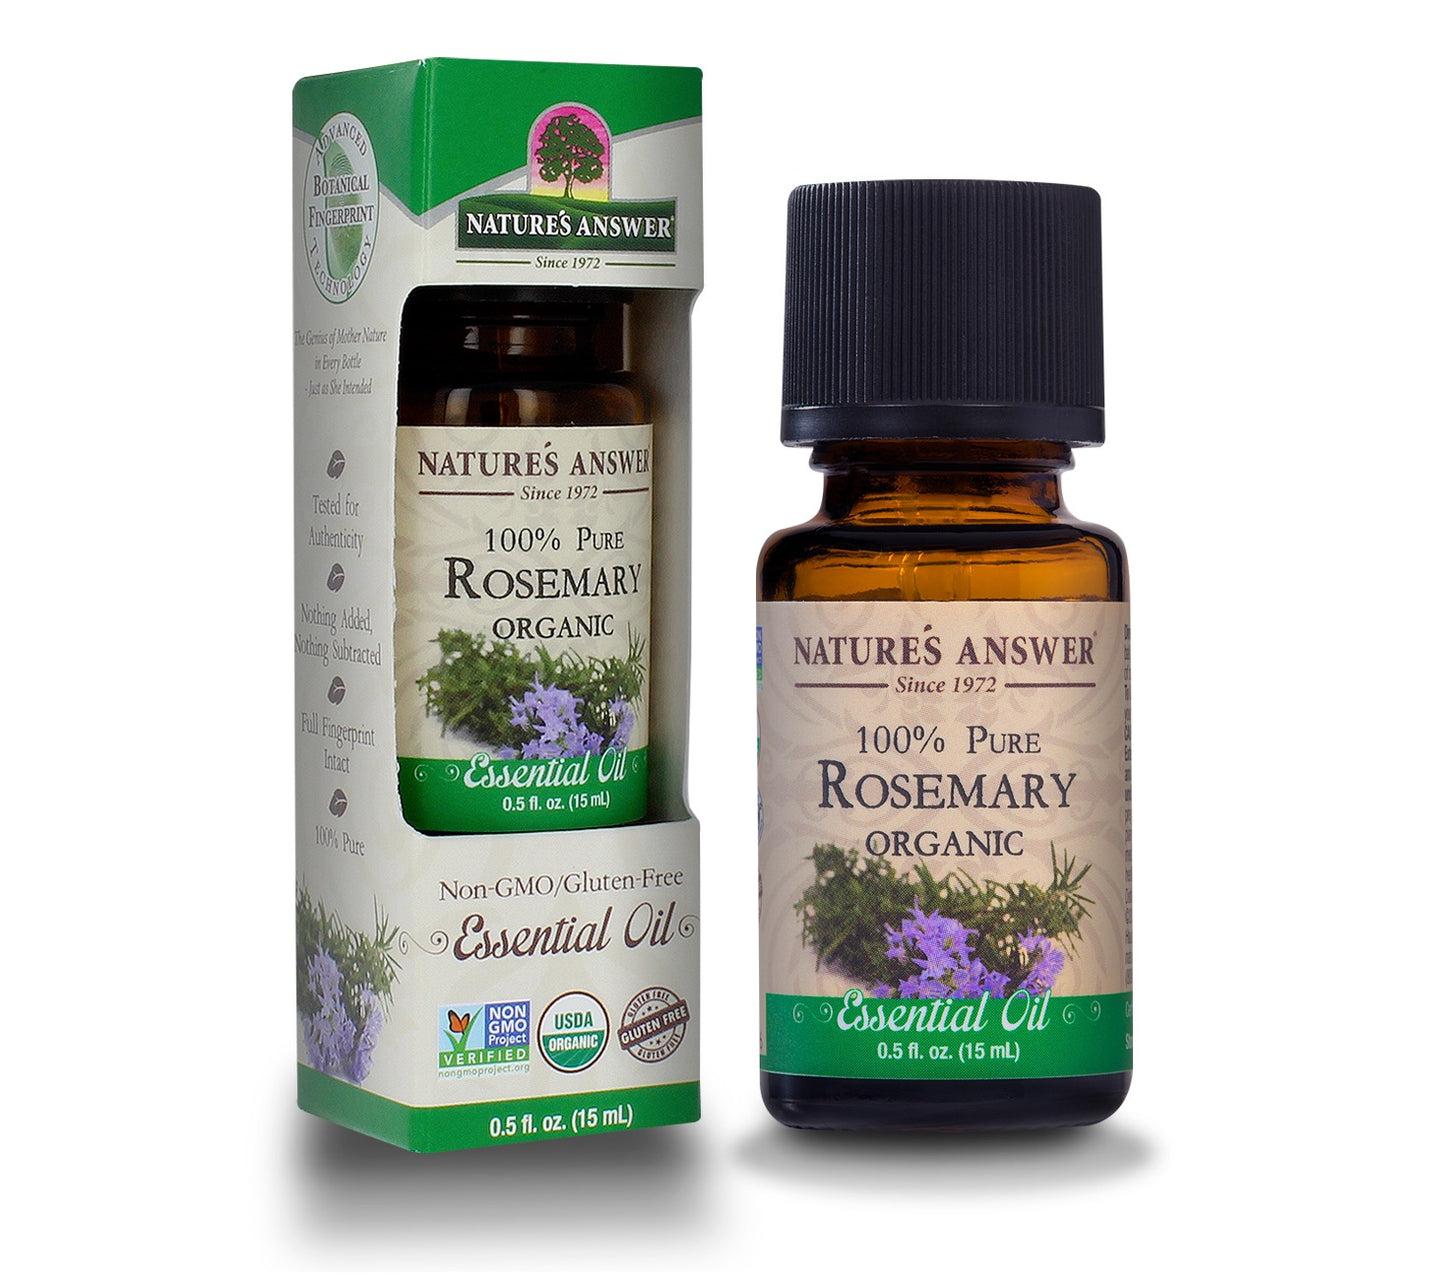 Nature's Answer Rosemary Essential Oil Organic